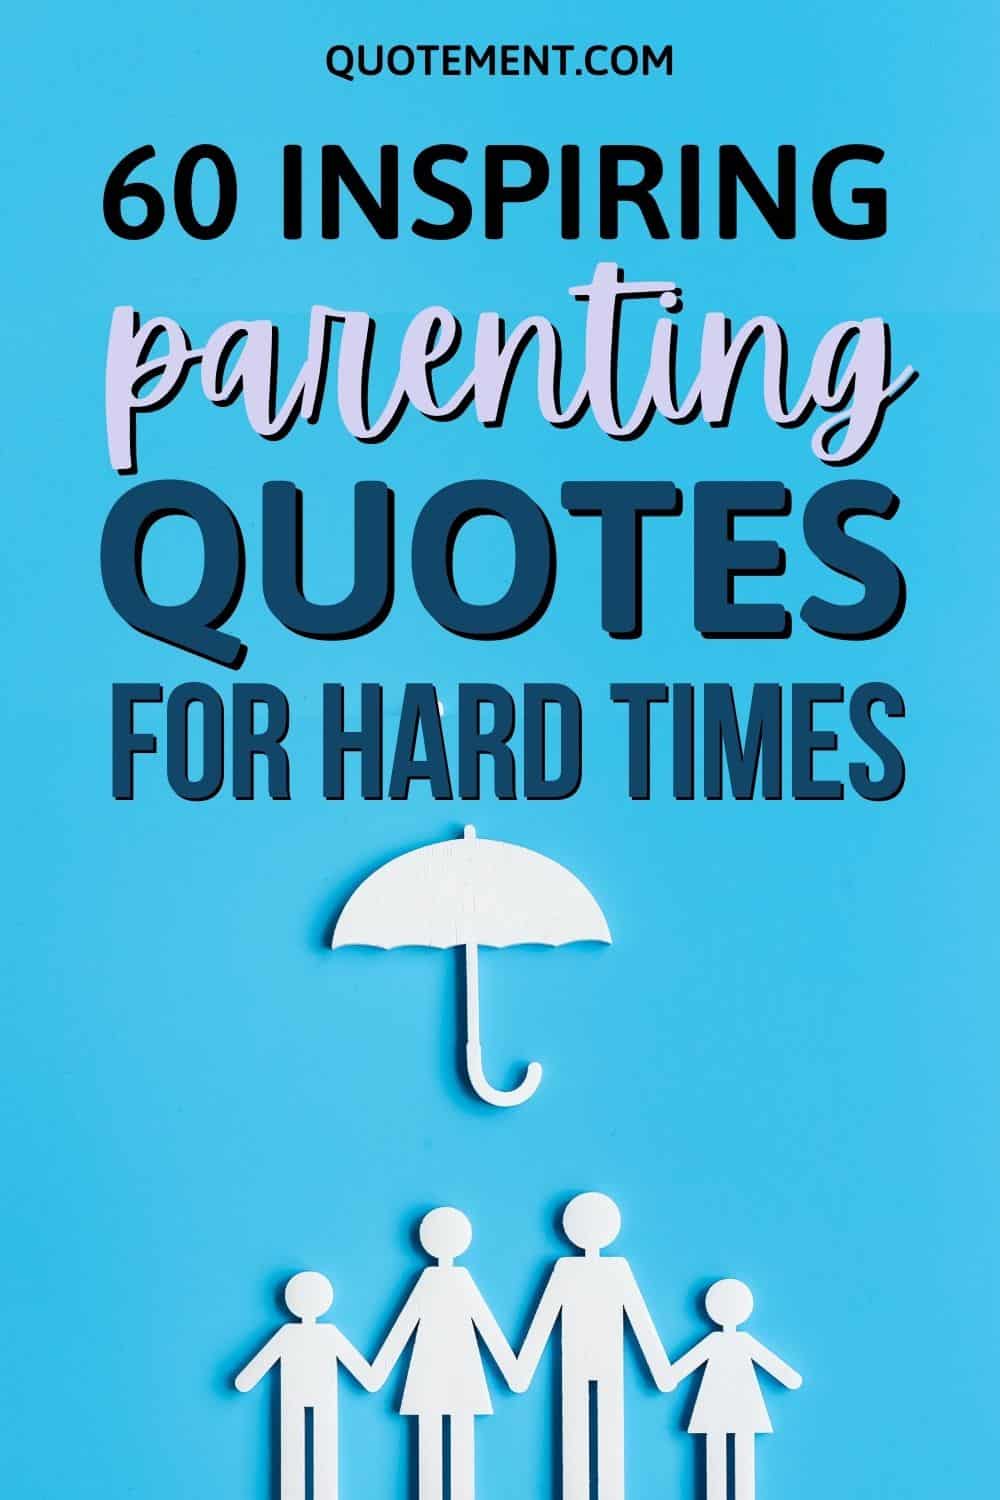 60 Best Parenting Quotes For Hard Times To Inspire You